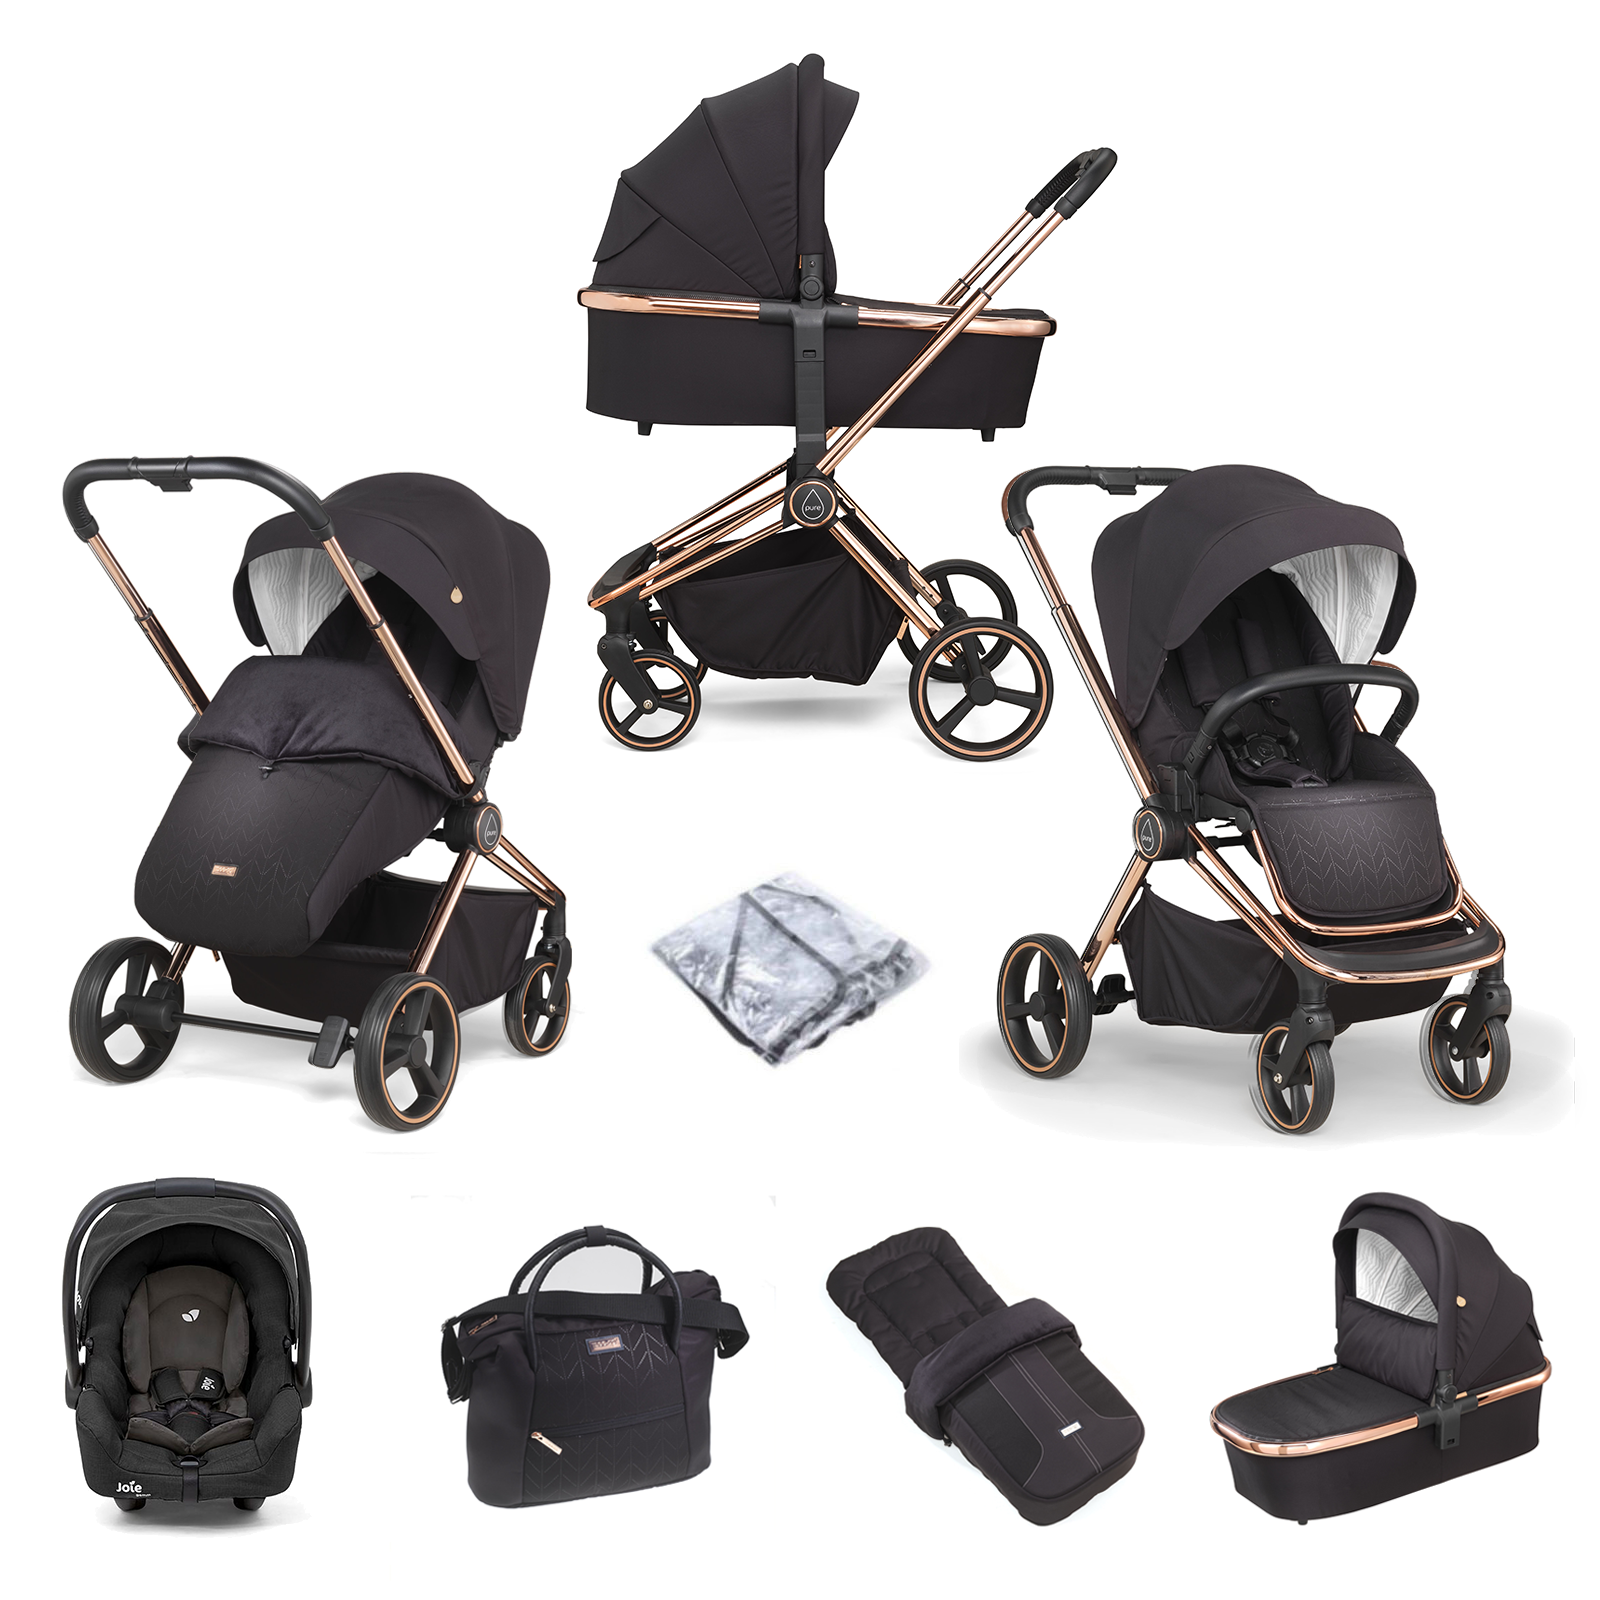 Mee-go Pure (Gemm) Travel System with Accessories - Dusty Rose